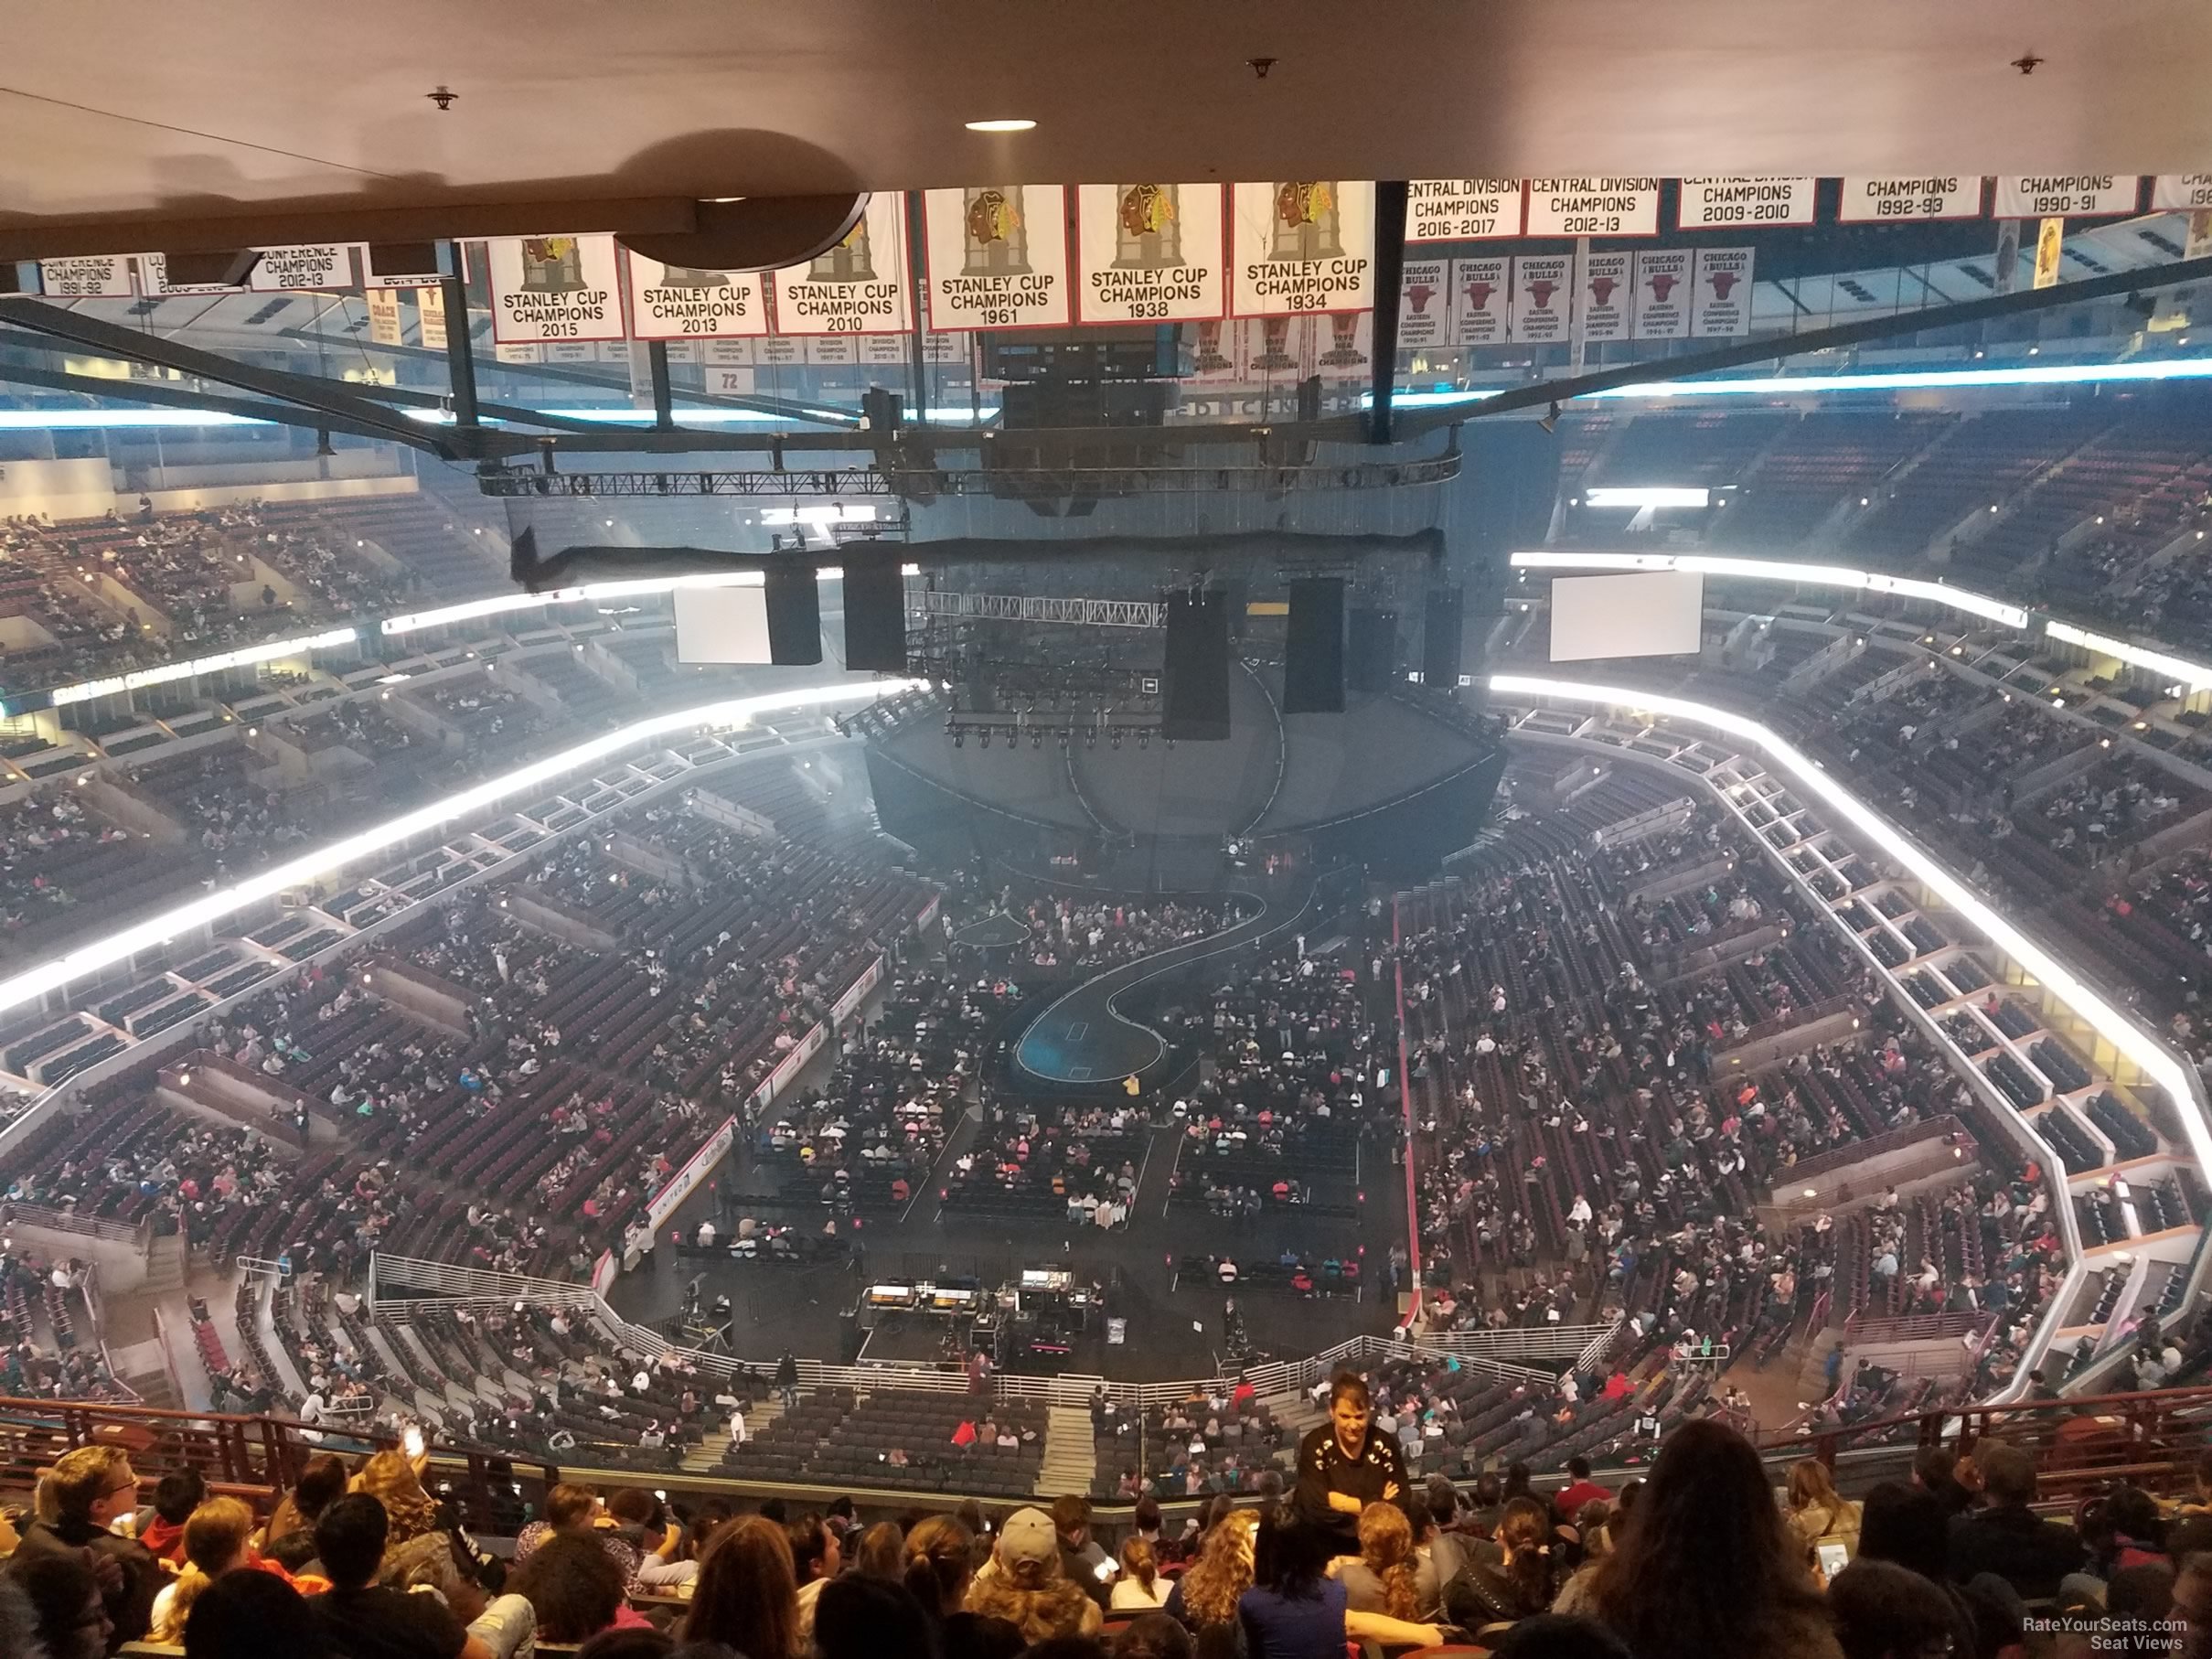 section 308, row 17 seat view  for concert - united center